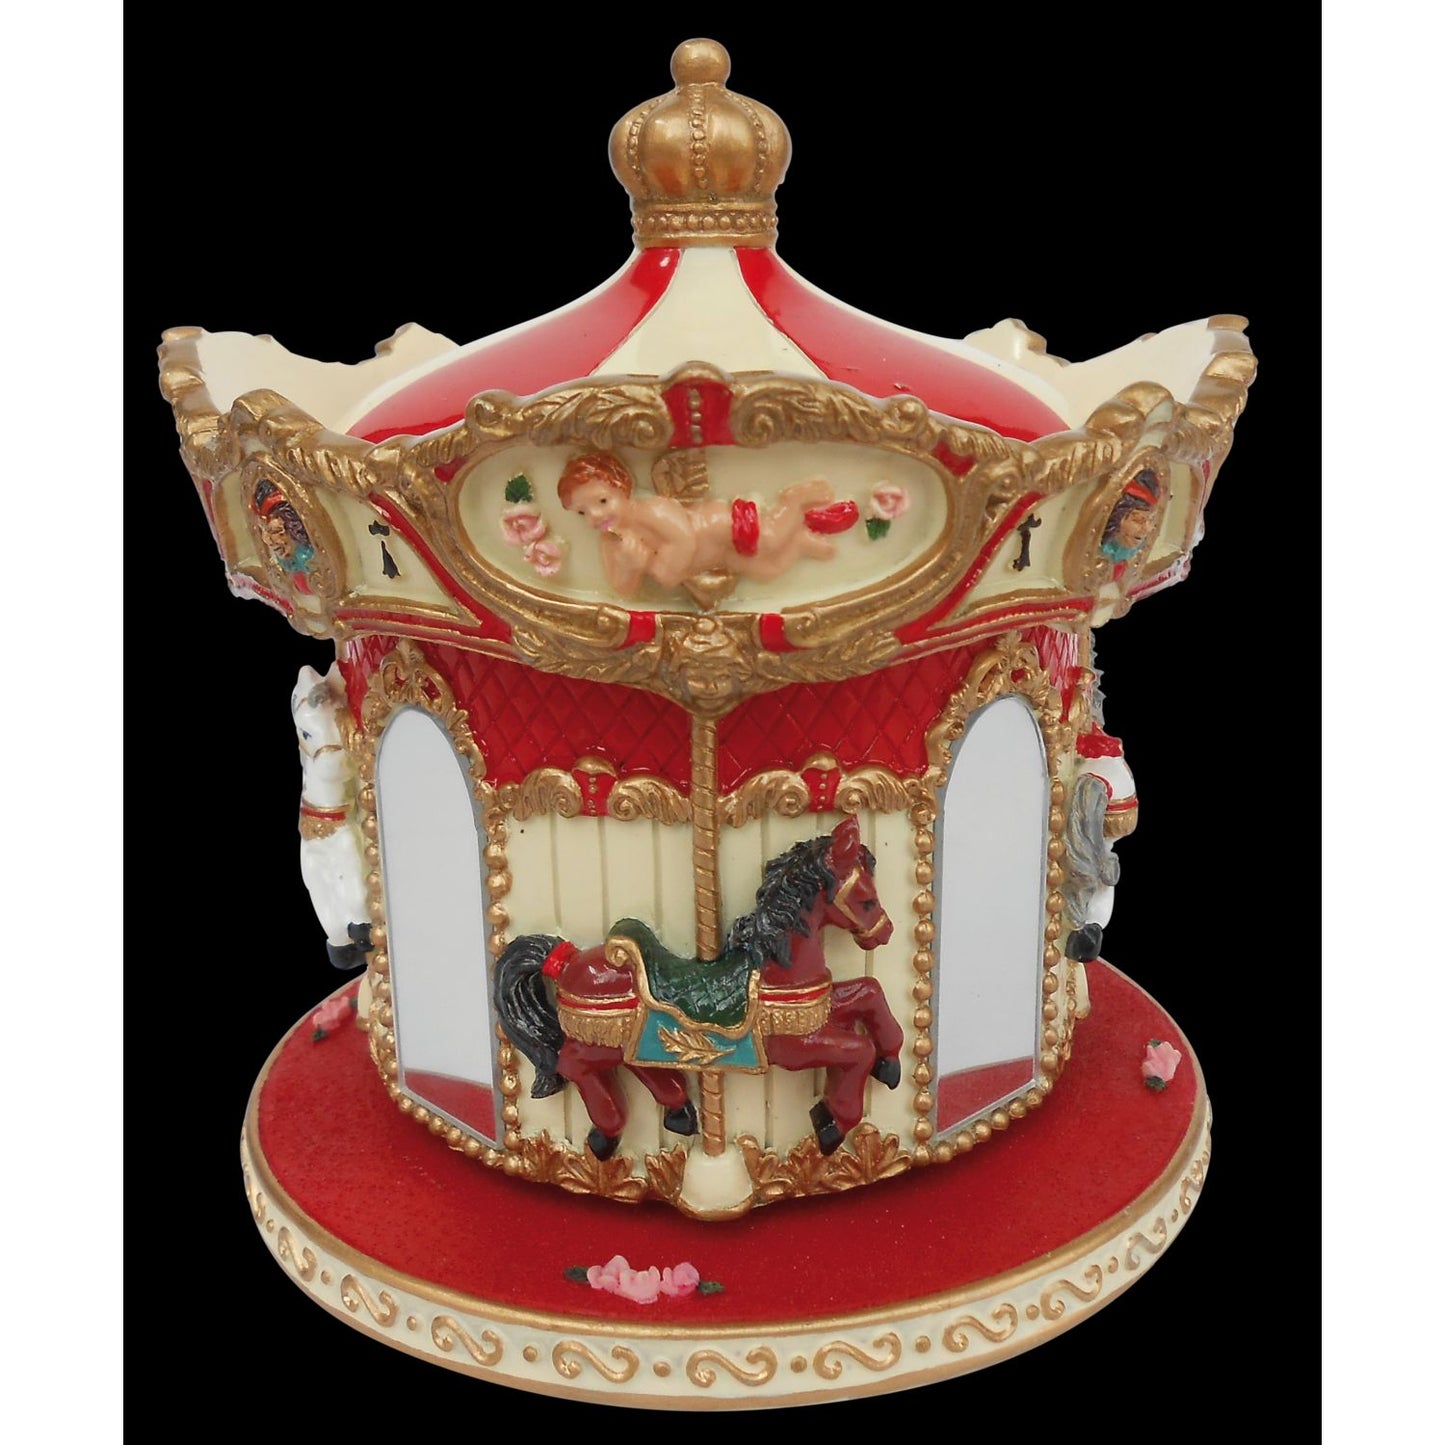 Musicbox Kingdom 4.7" Carousel With Mirror Turns To A Famous Melody